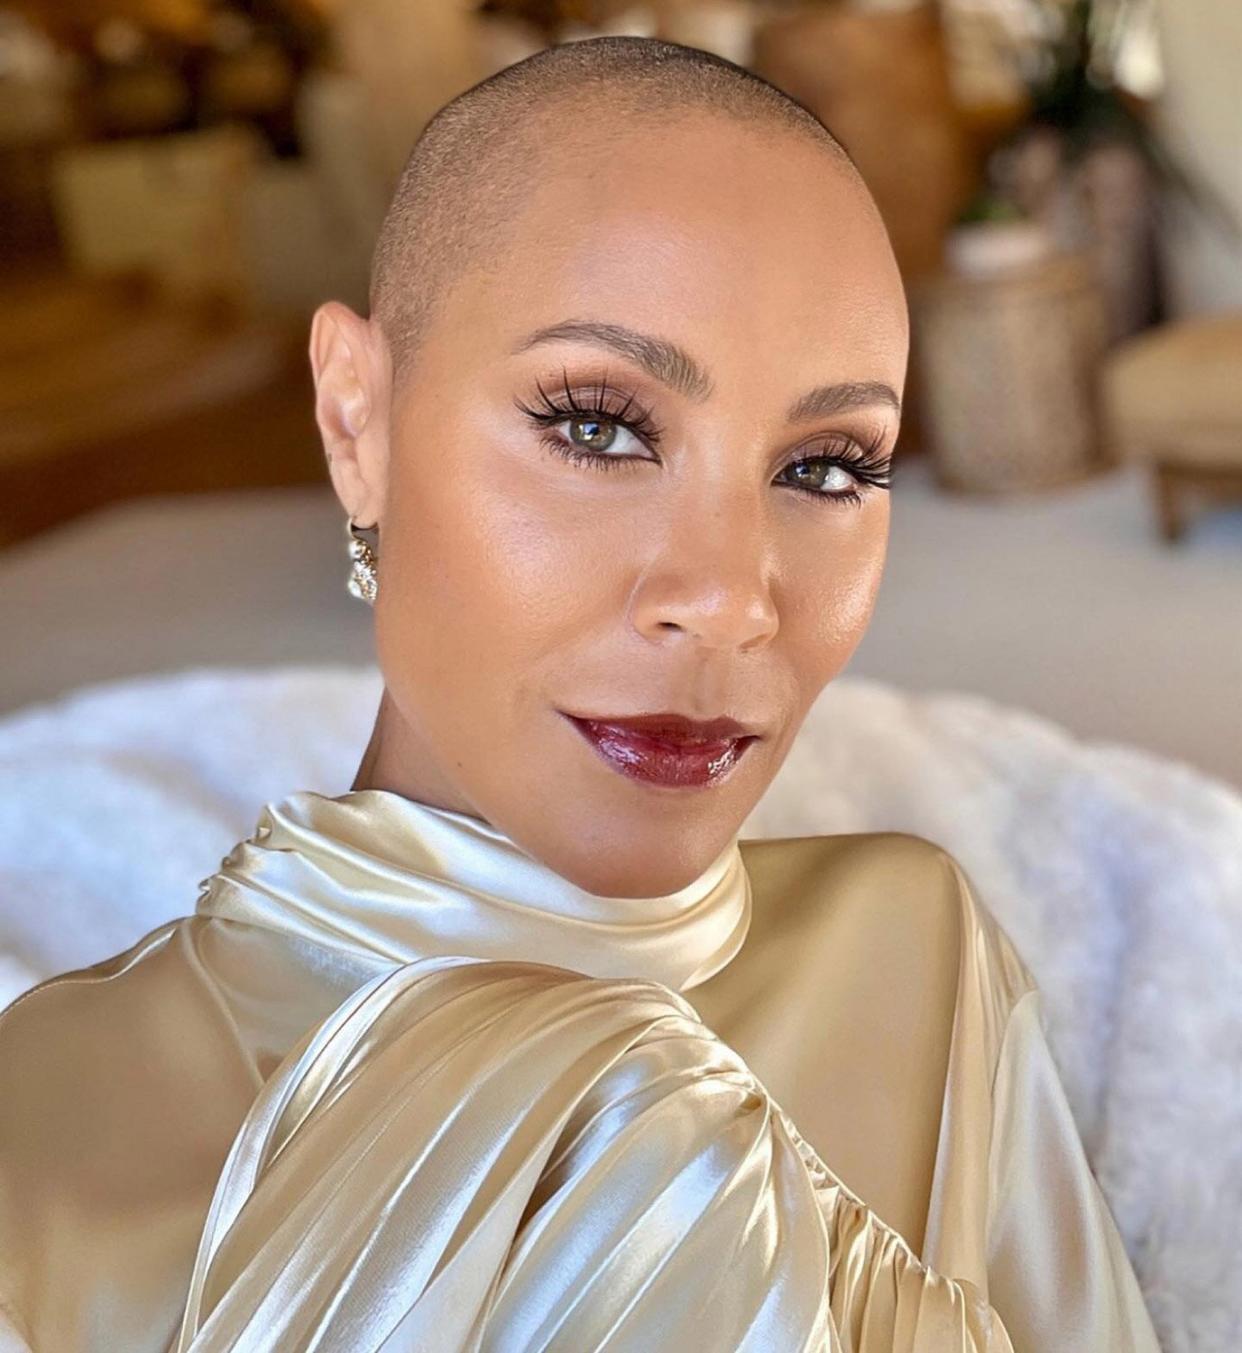 https://www.instagram.com/p/Cidf18IPl_M/?hl=en Hed: Jada Pinkett Smith Celebrates 'Bald Is Beautiful Day' With Her 'Brothers and and Sisters with No Hair'